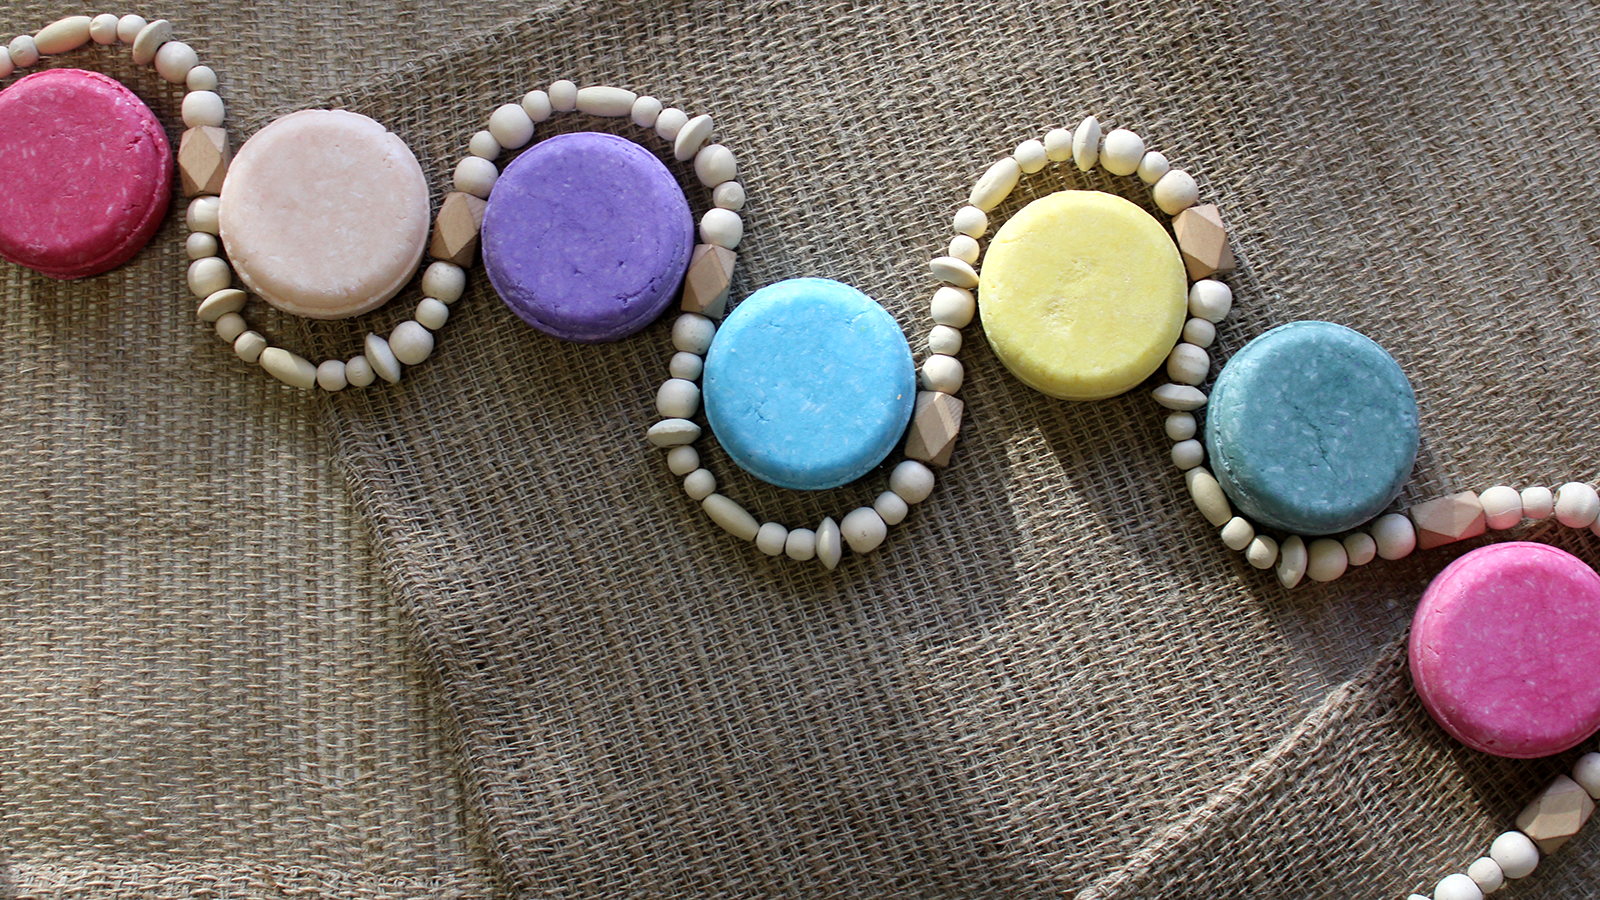 Flat lay of round multicolored shampoo bar with a string of wooden beads snaking around the bars, on a background of burlap. Alpaca Soaps AlpacaSoaps